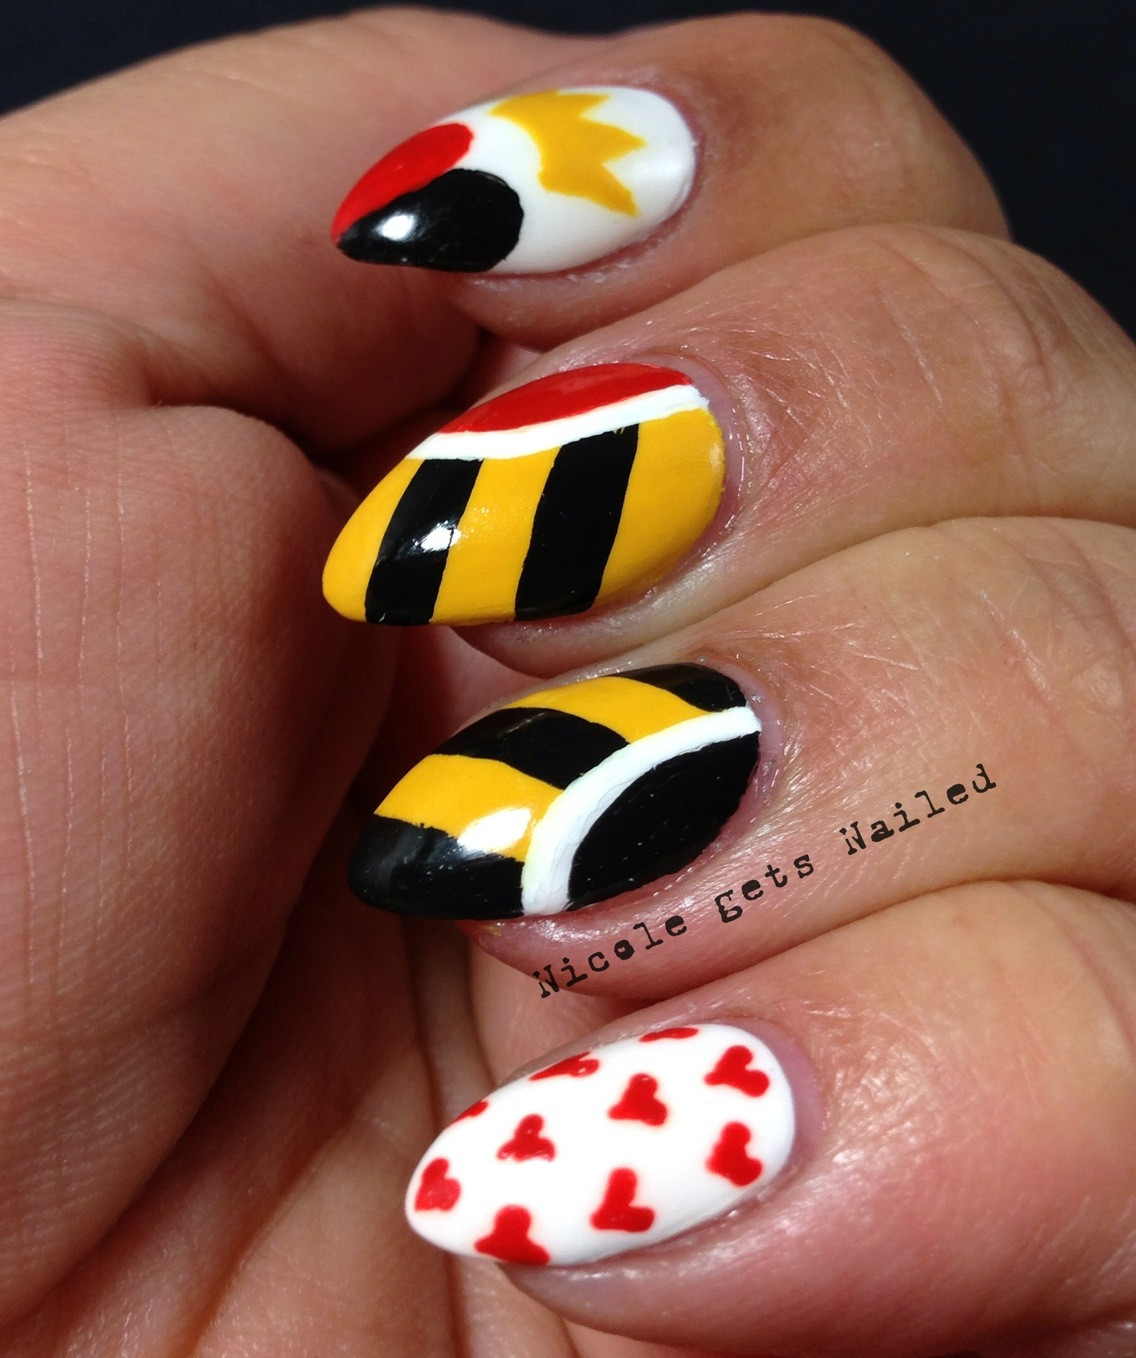 Queen Of Hearts Nail Designs
 Nicole s Nailed Q is for Queen of Hearts